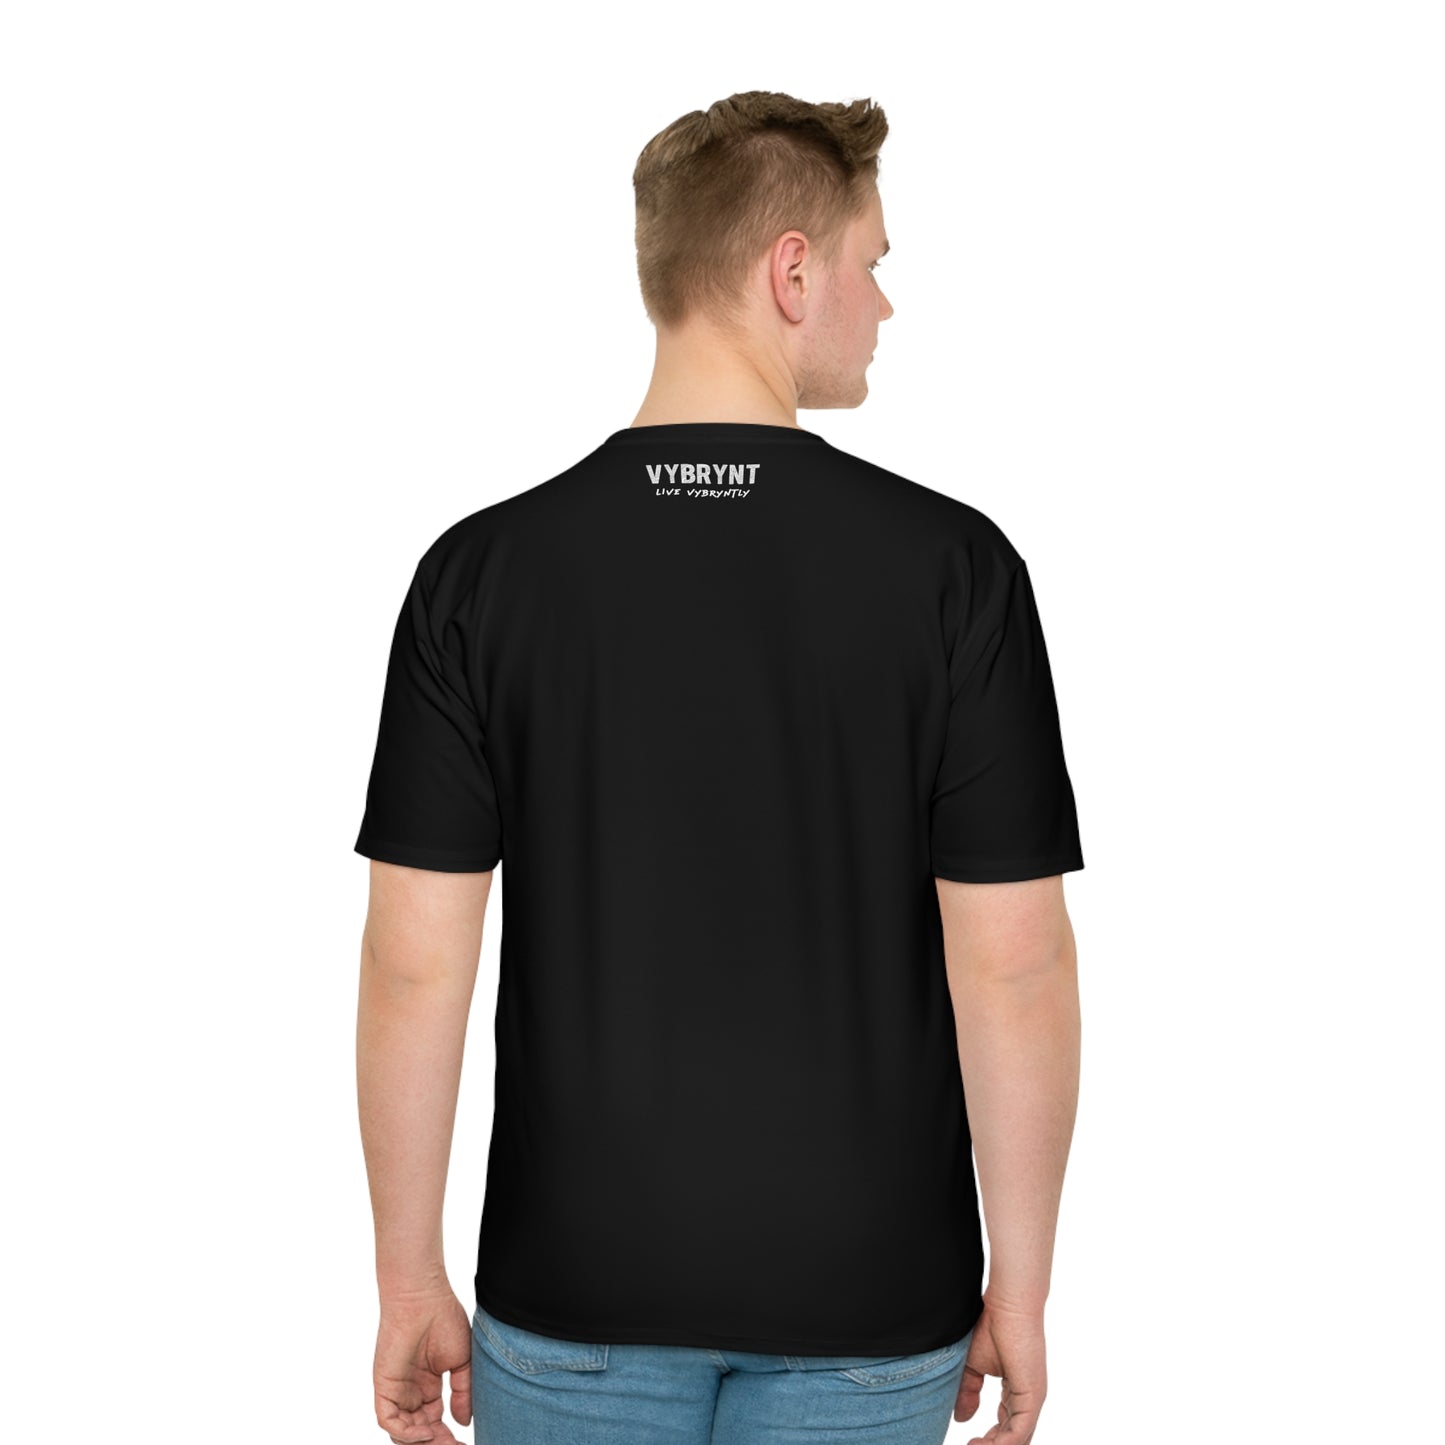 The Mystic Sounds Of Ambient Synths Men's Black T-Shirt